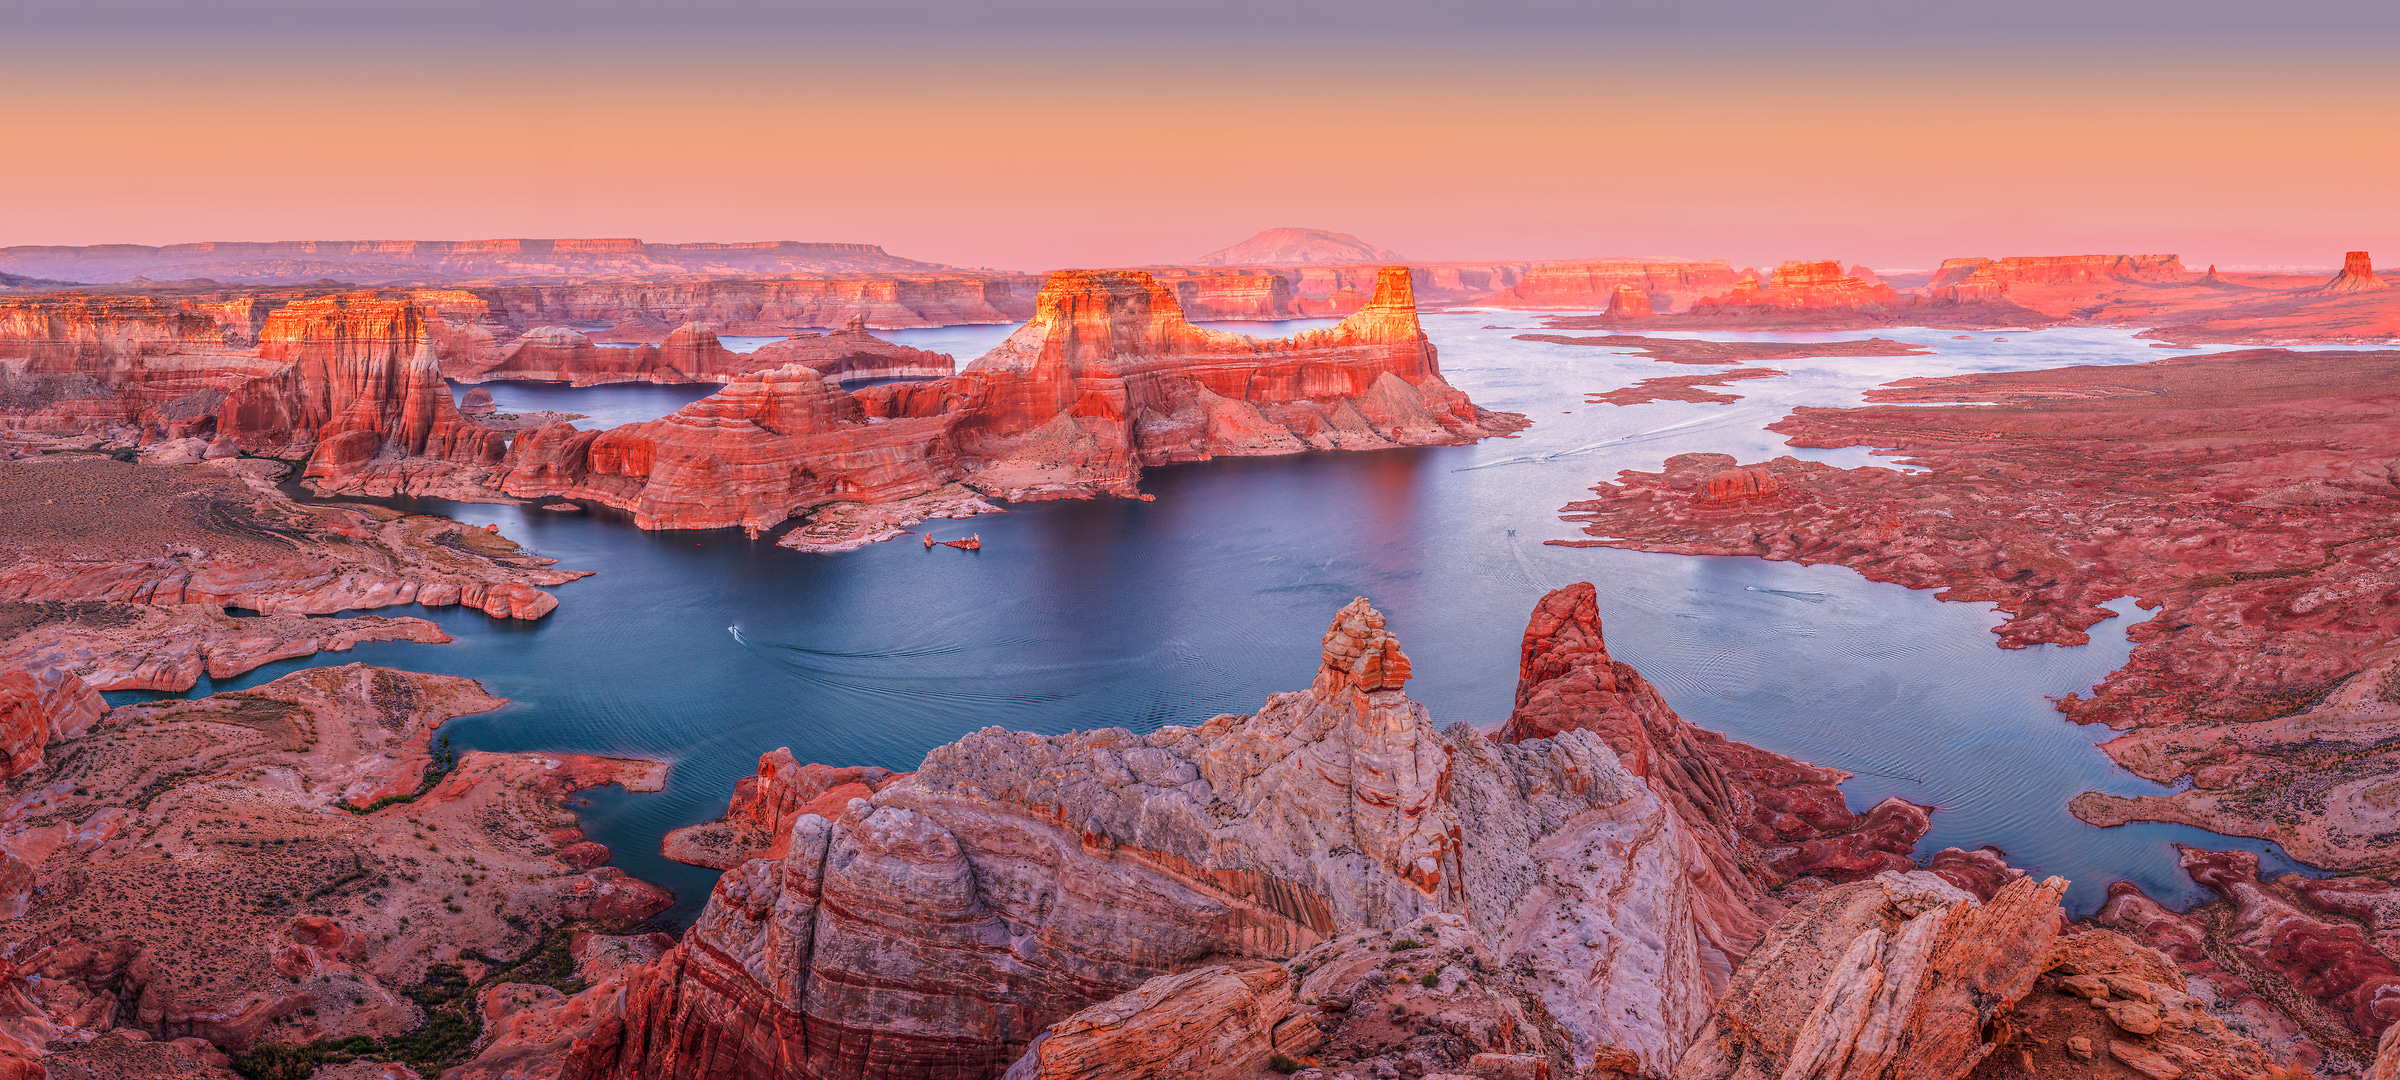 681 megapixels! A very high resolution, large-format VAST photo print of Lake Powell; fine art landscape photo created by Chris Collacott in Glen Canyon National Recreational Area, Utah